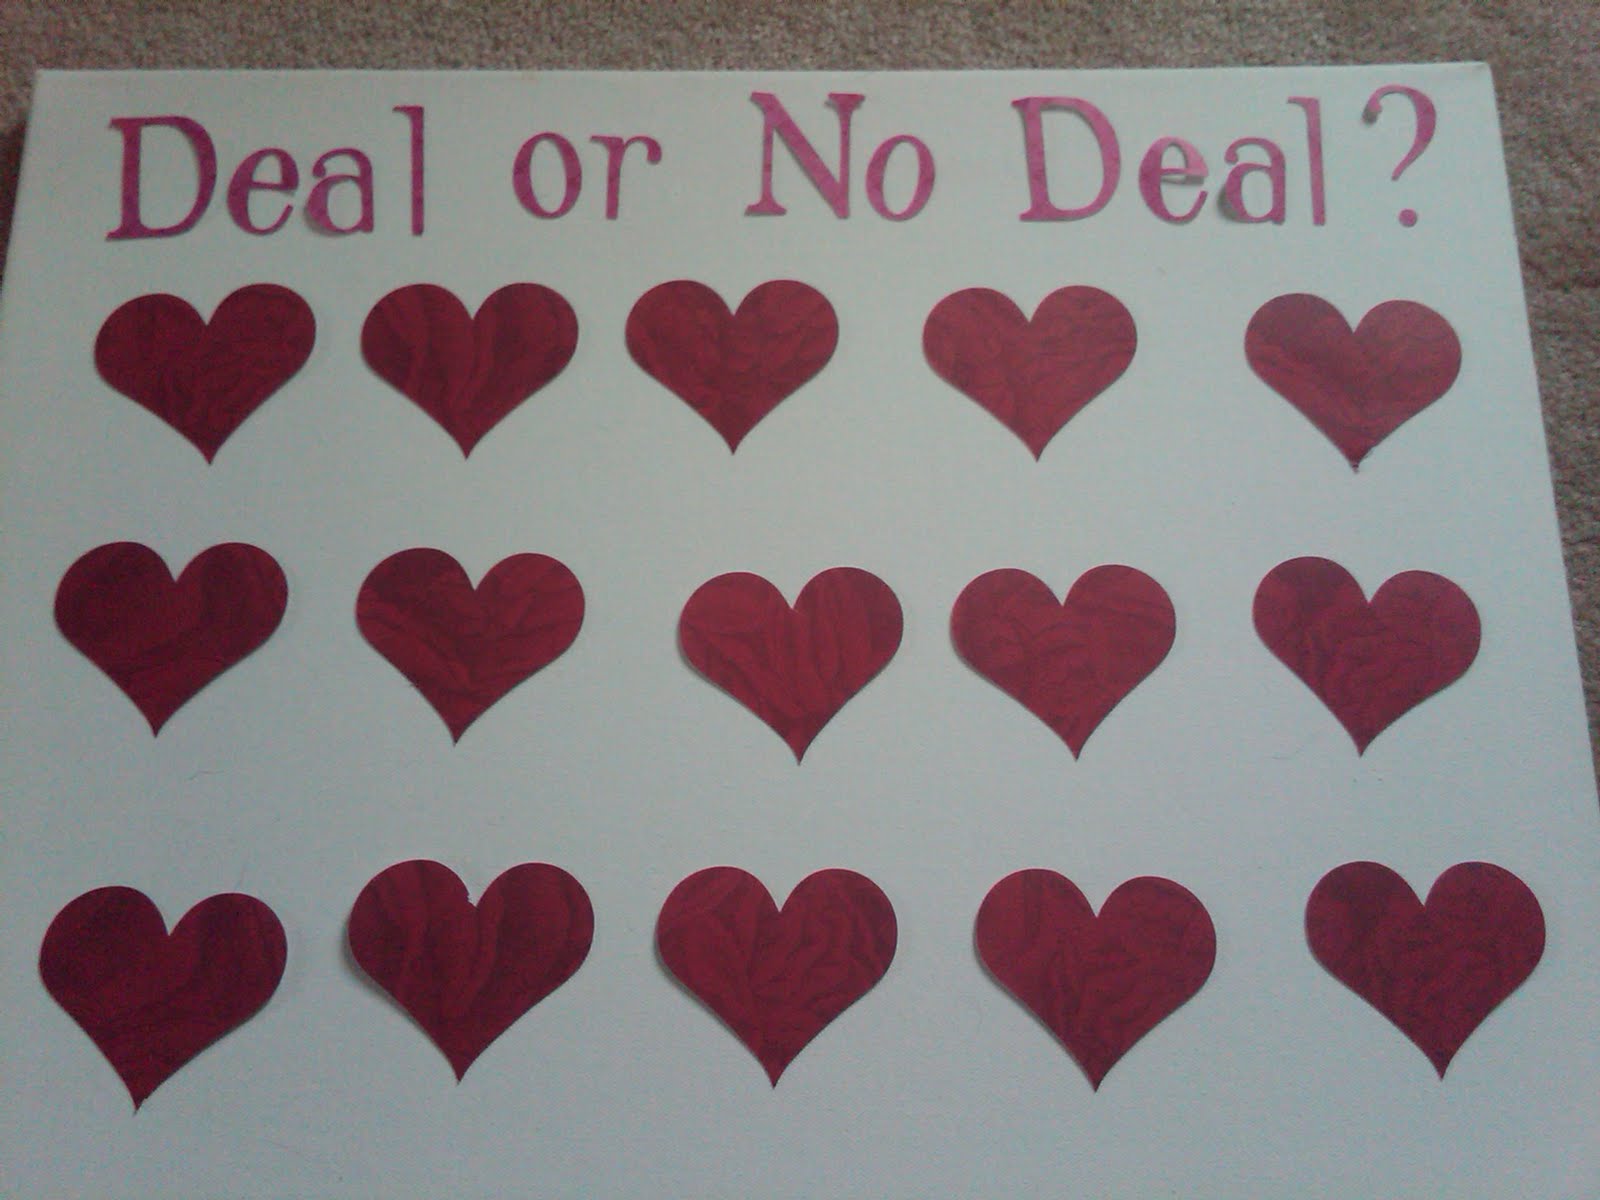 Deal Or No Deal Game Rules